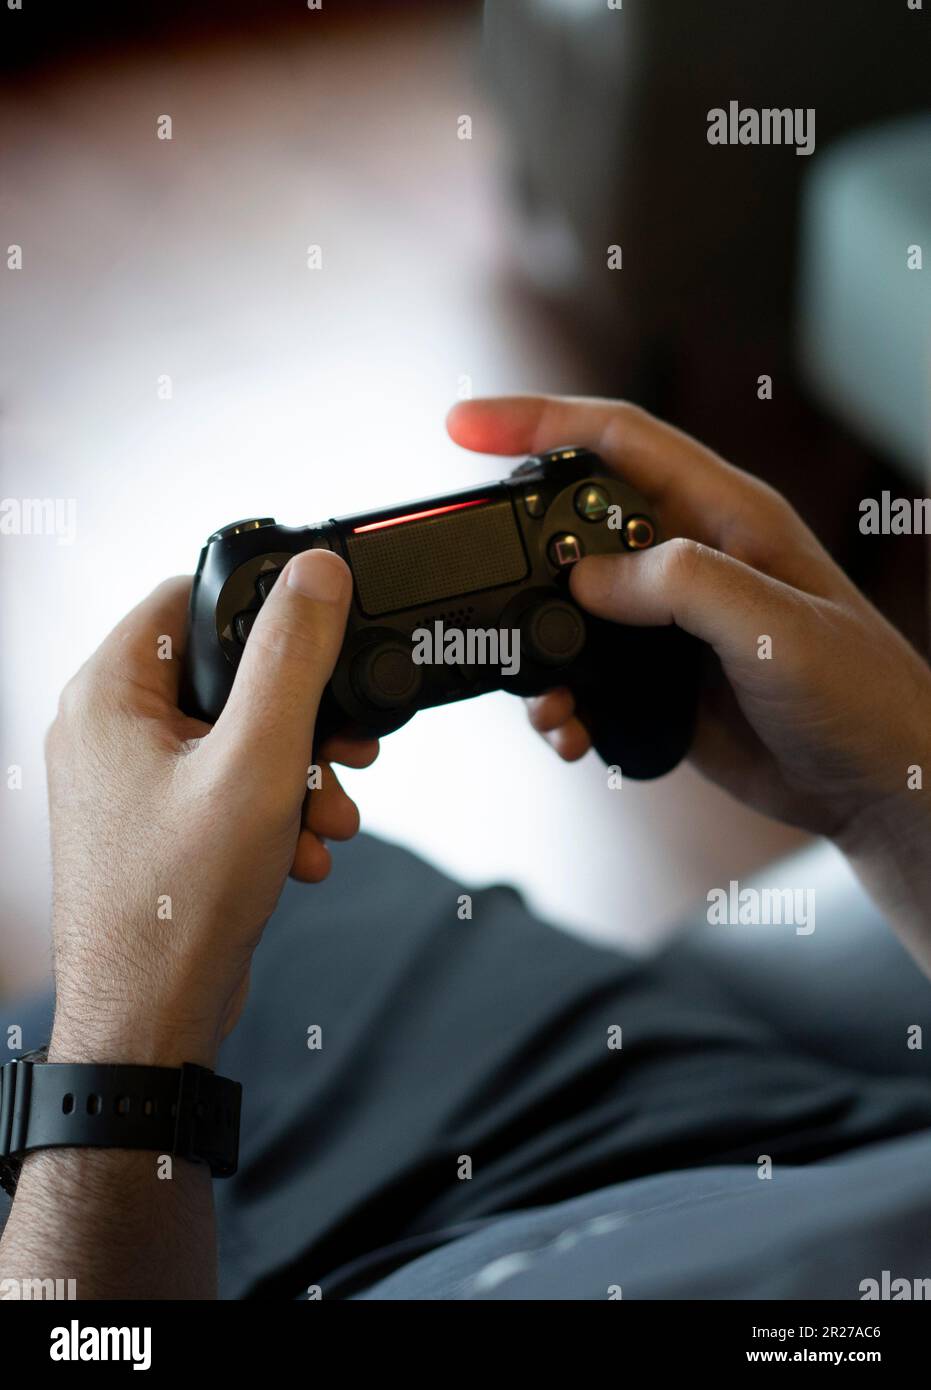 High angle view of an adult man's hands holding a joystick while playing a video game on a console Stock Photo